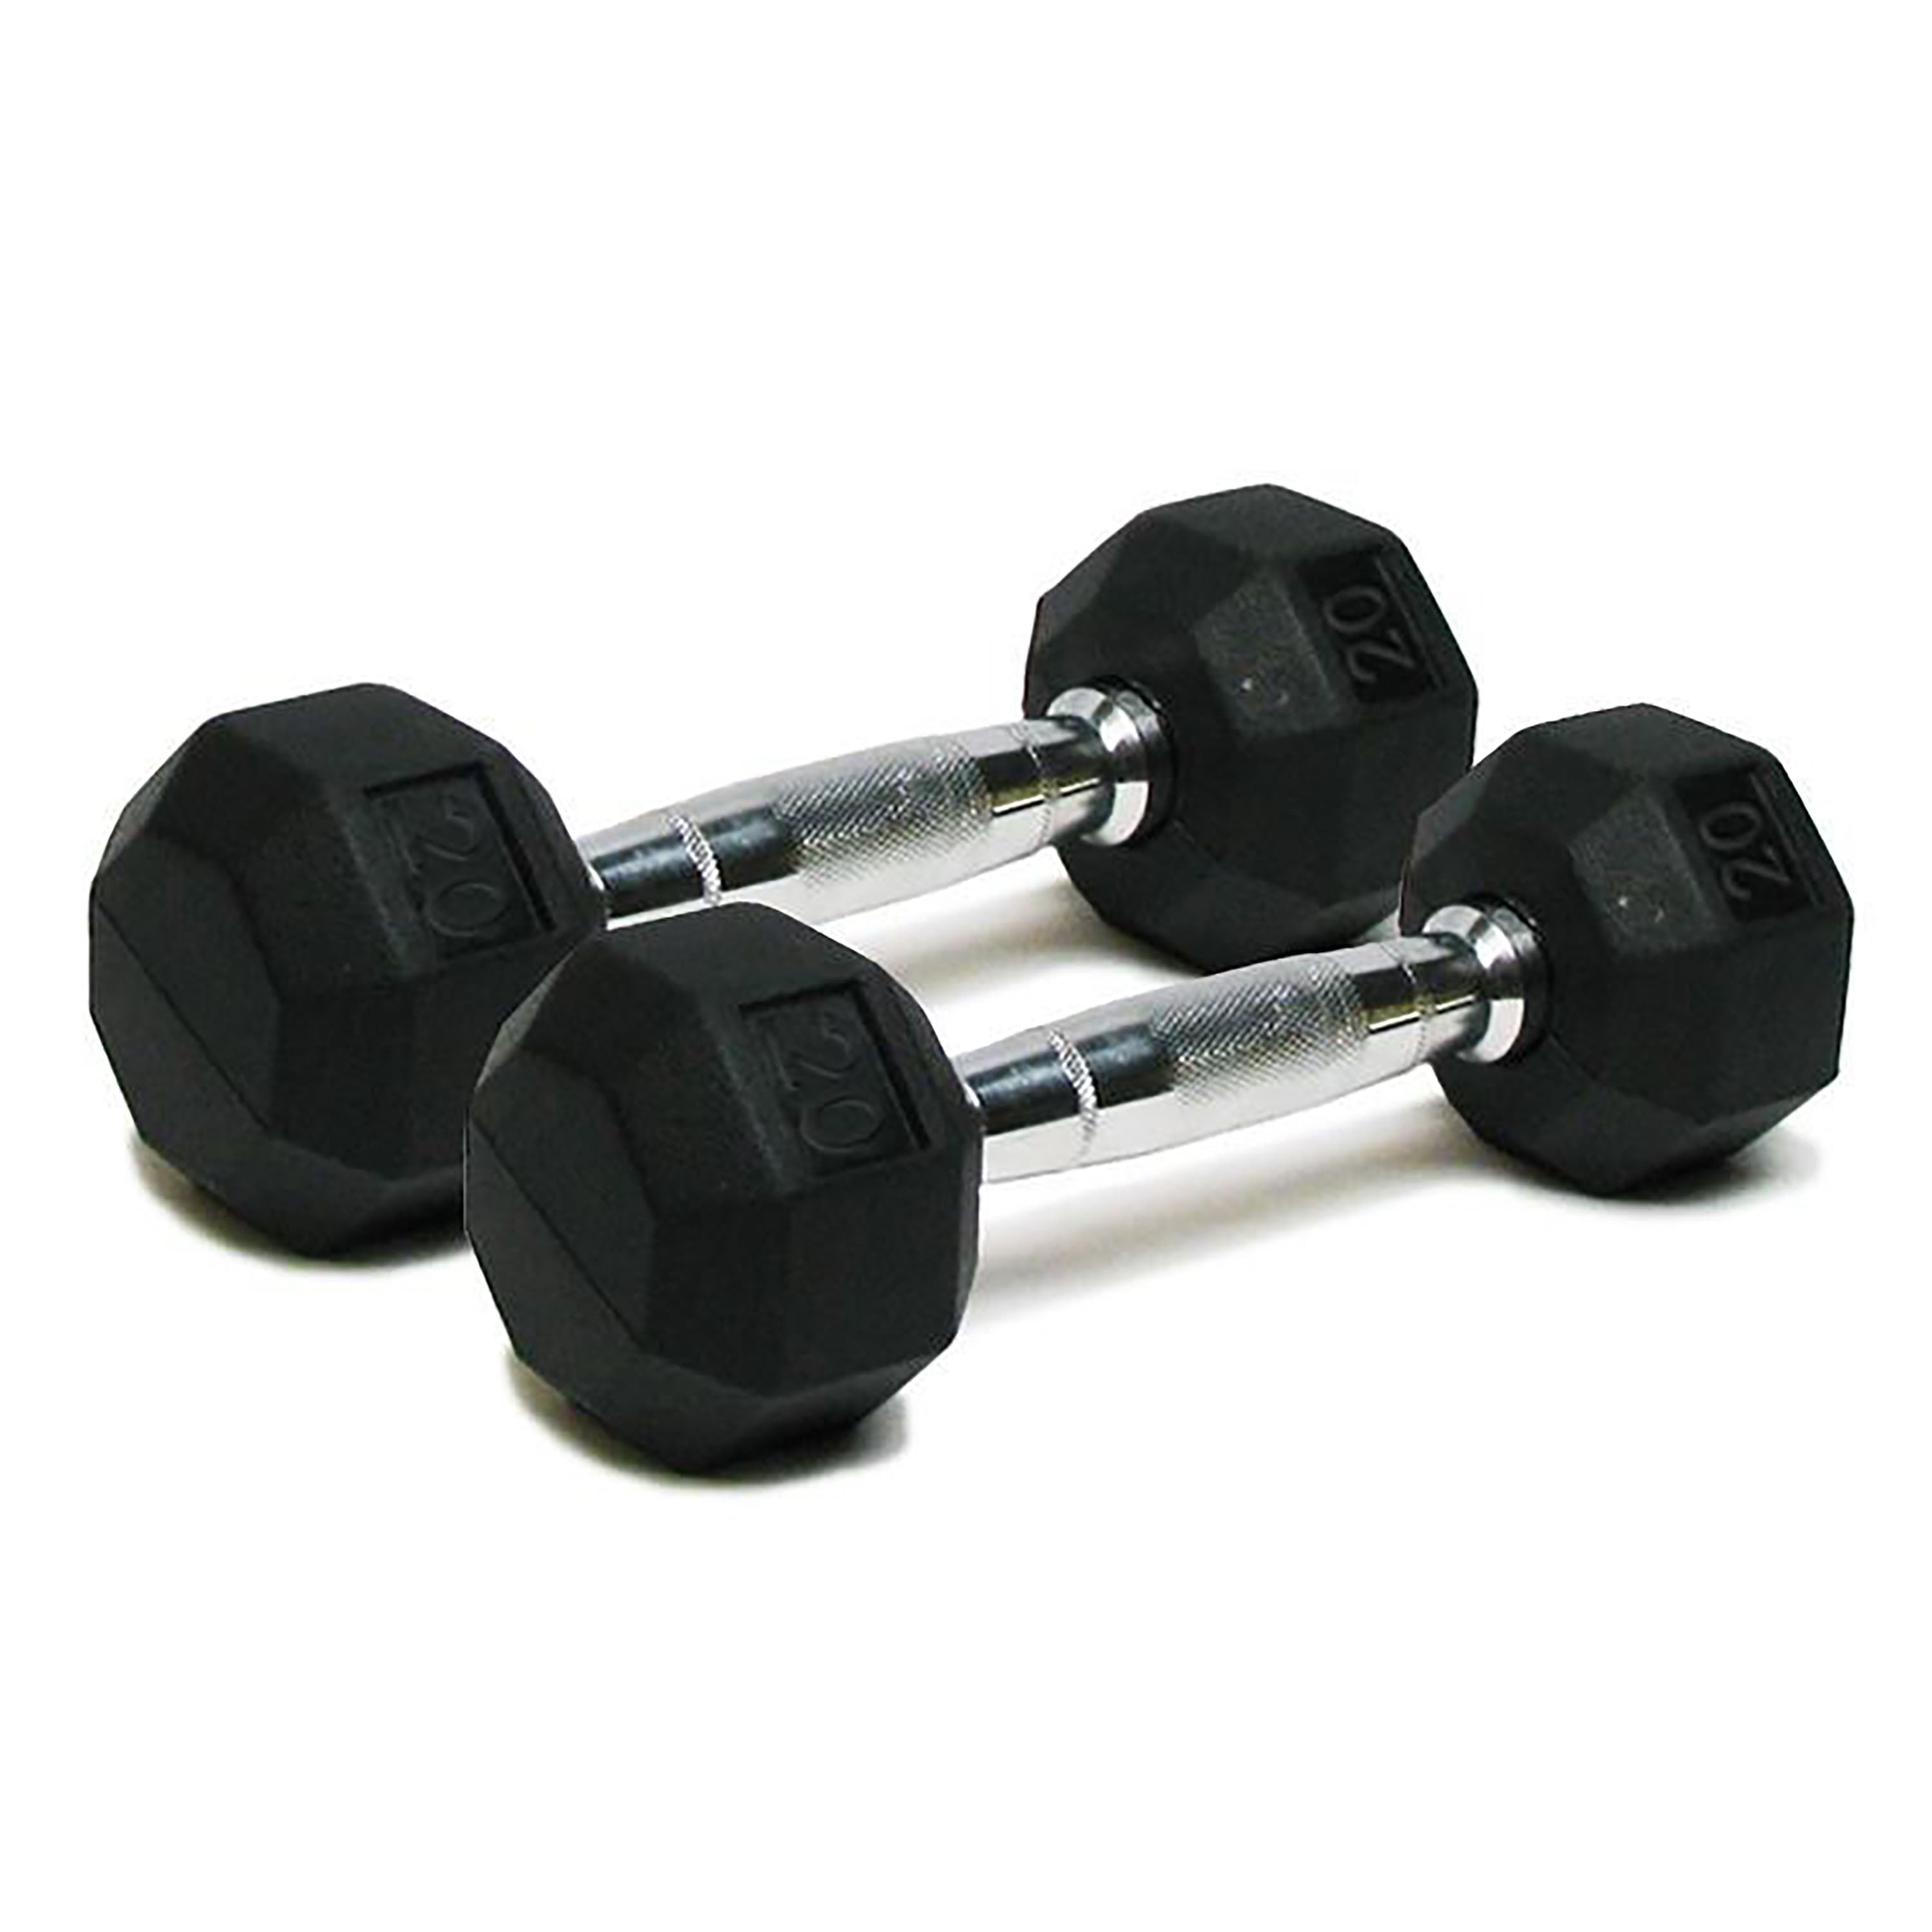 Well-Fit Rubber/Cast Iron Hex Dumbbell 20lb Set $25 at Walmart